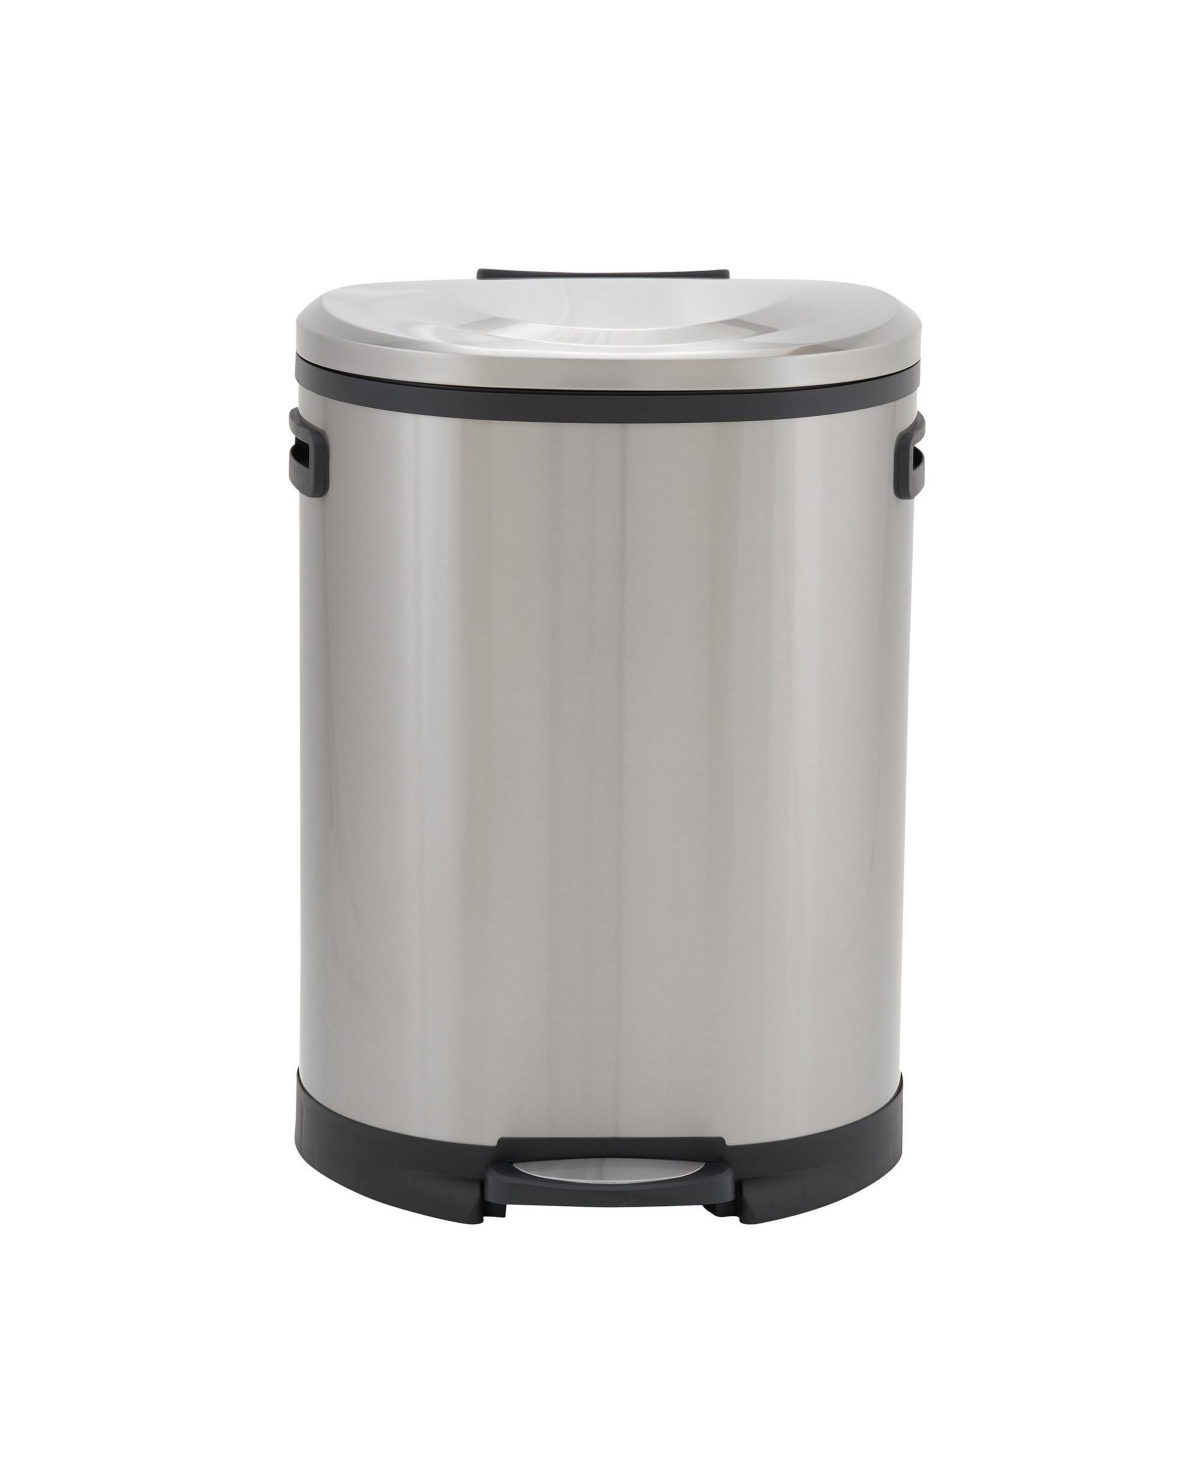 Stainless Steel 50L Aspen Oval Step Trash Can - Stainless Steel